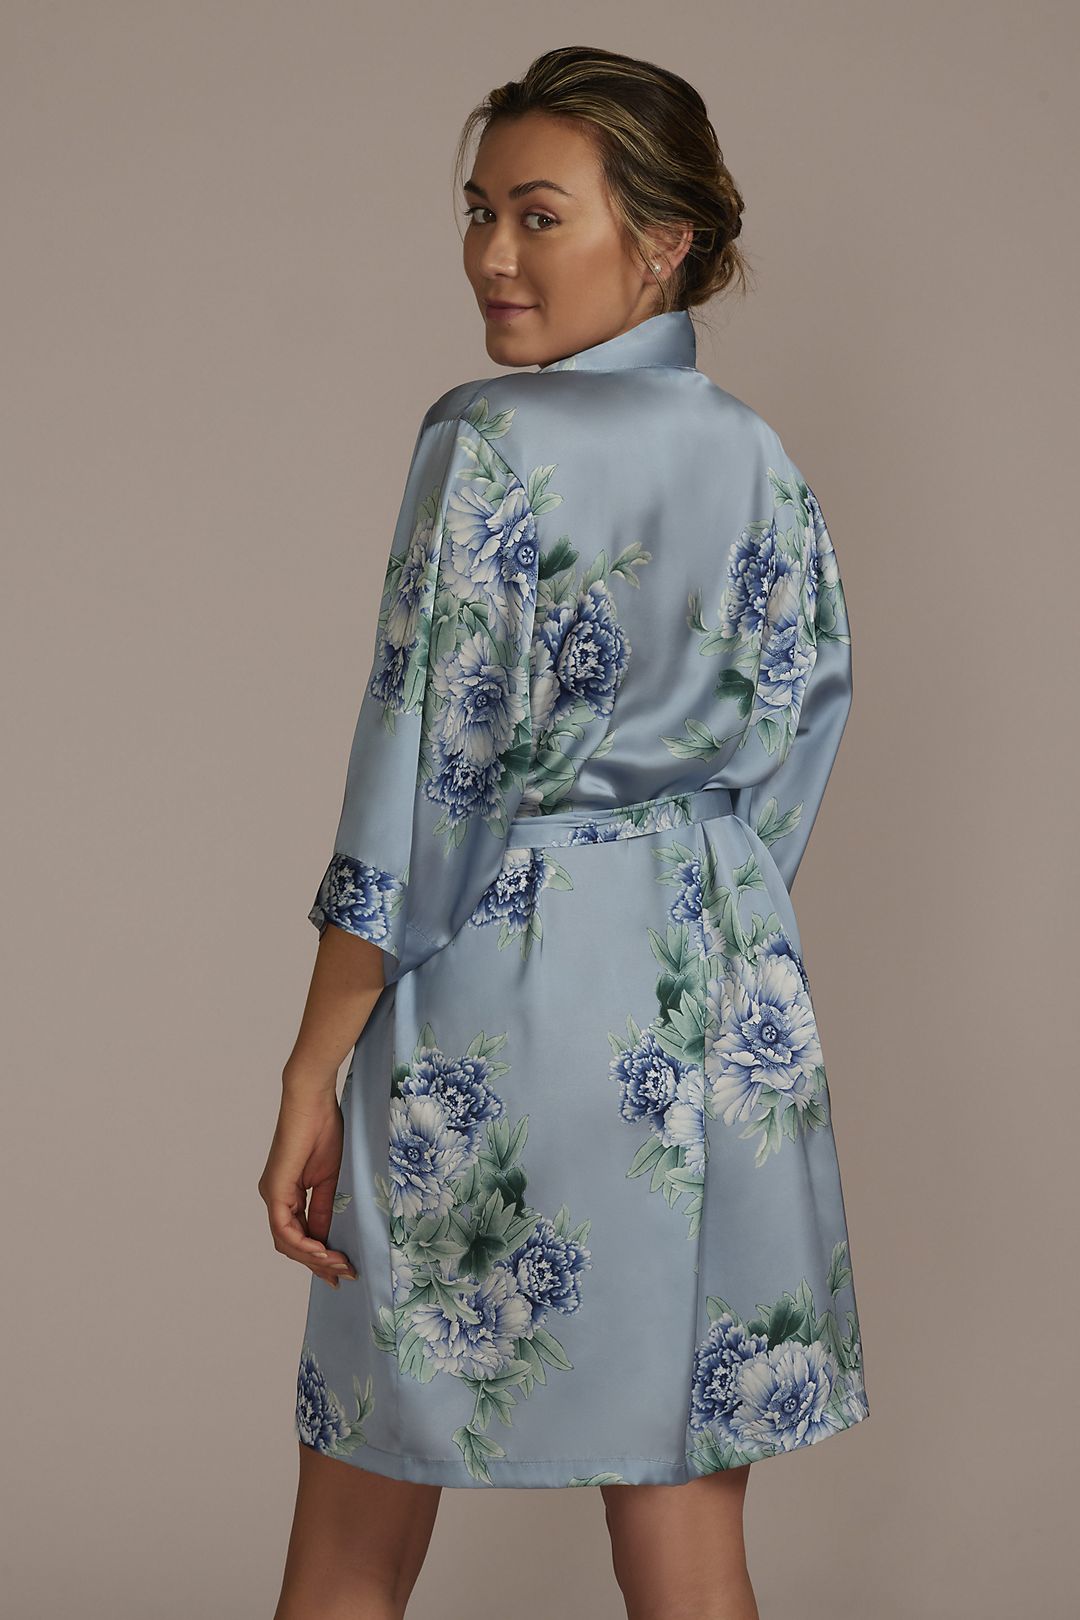 Dusty Blue and Green Floral Satin Robe Image 2